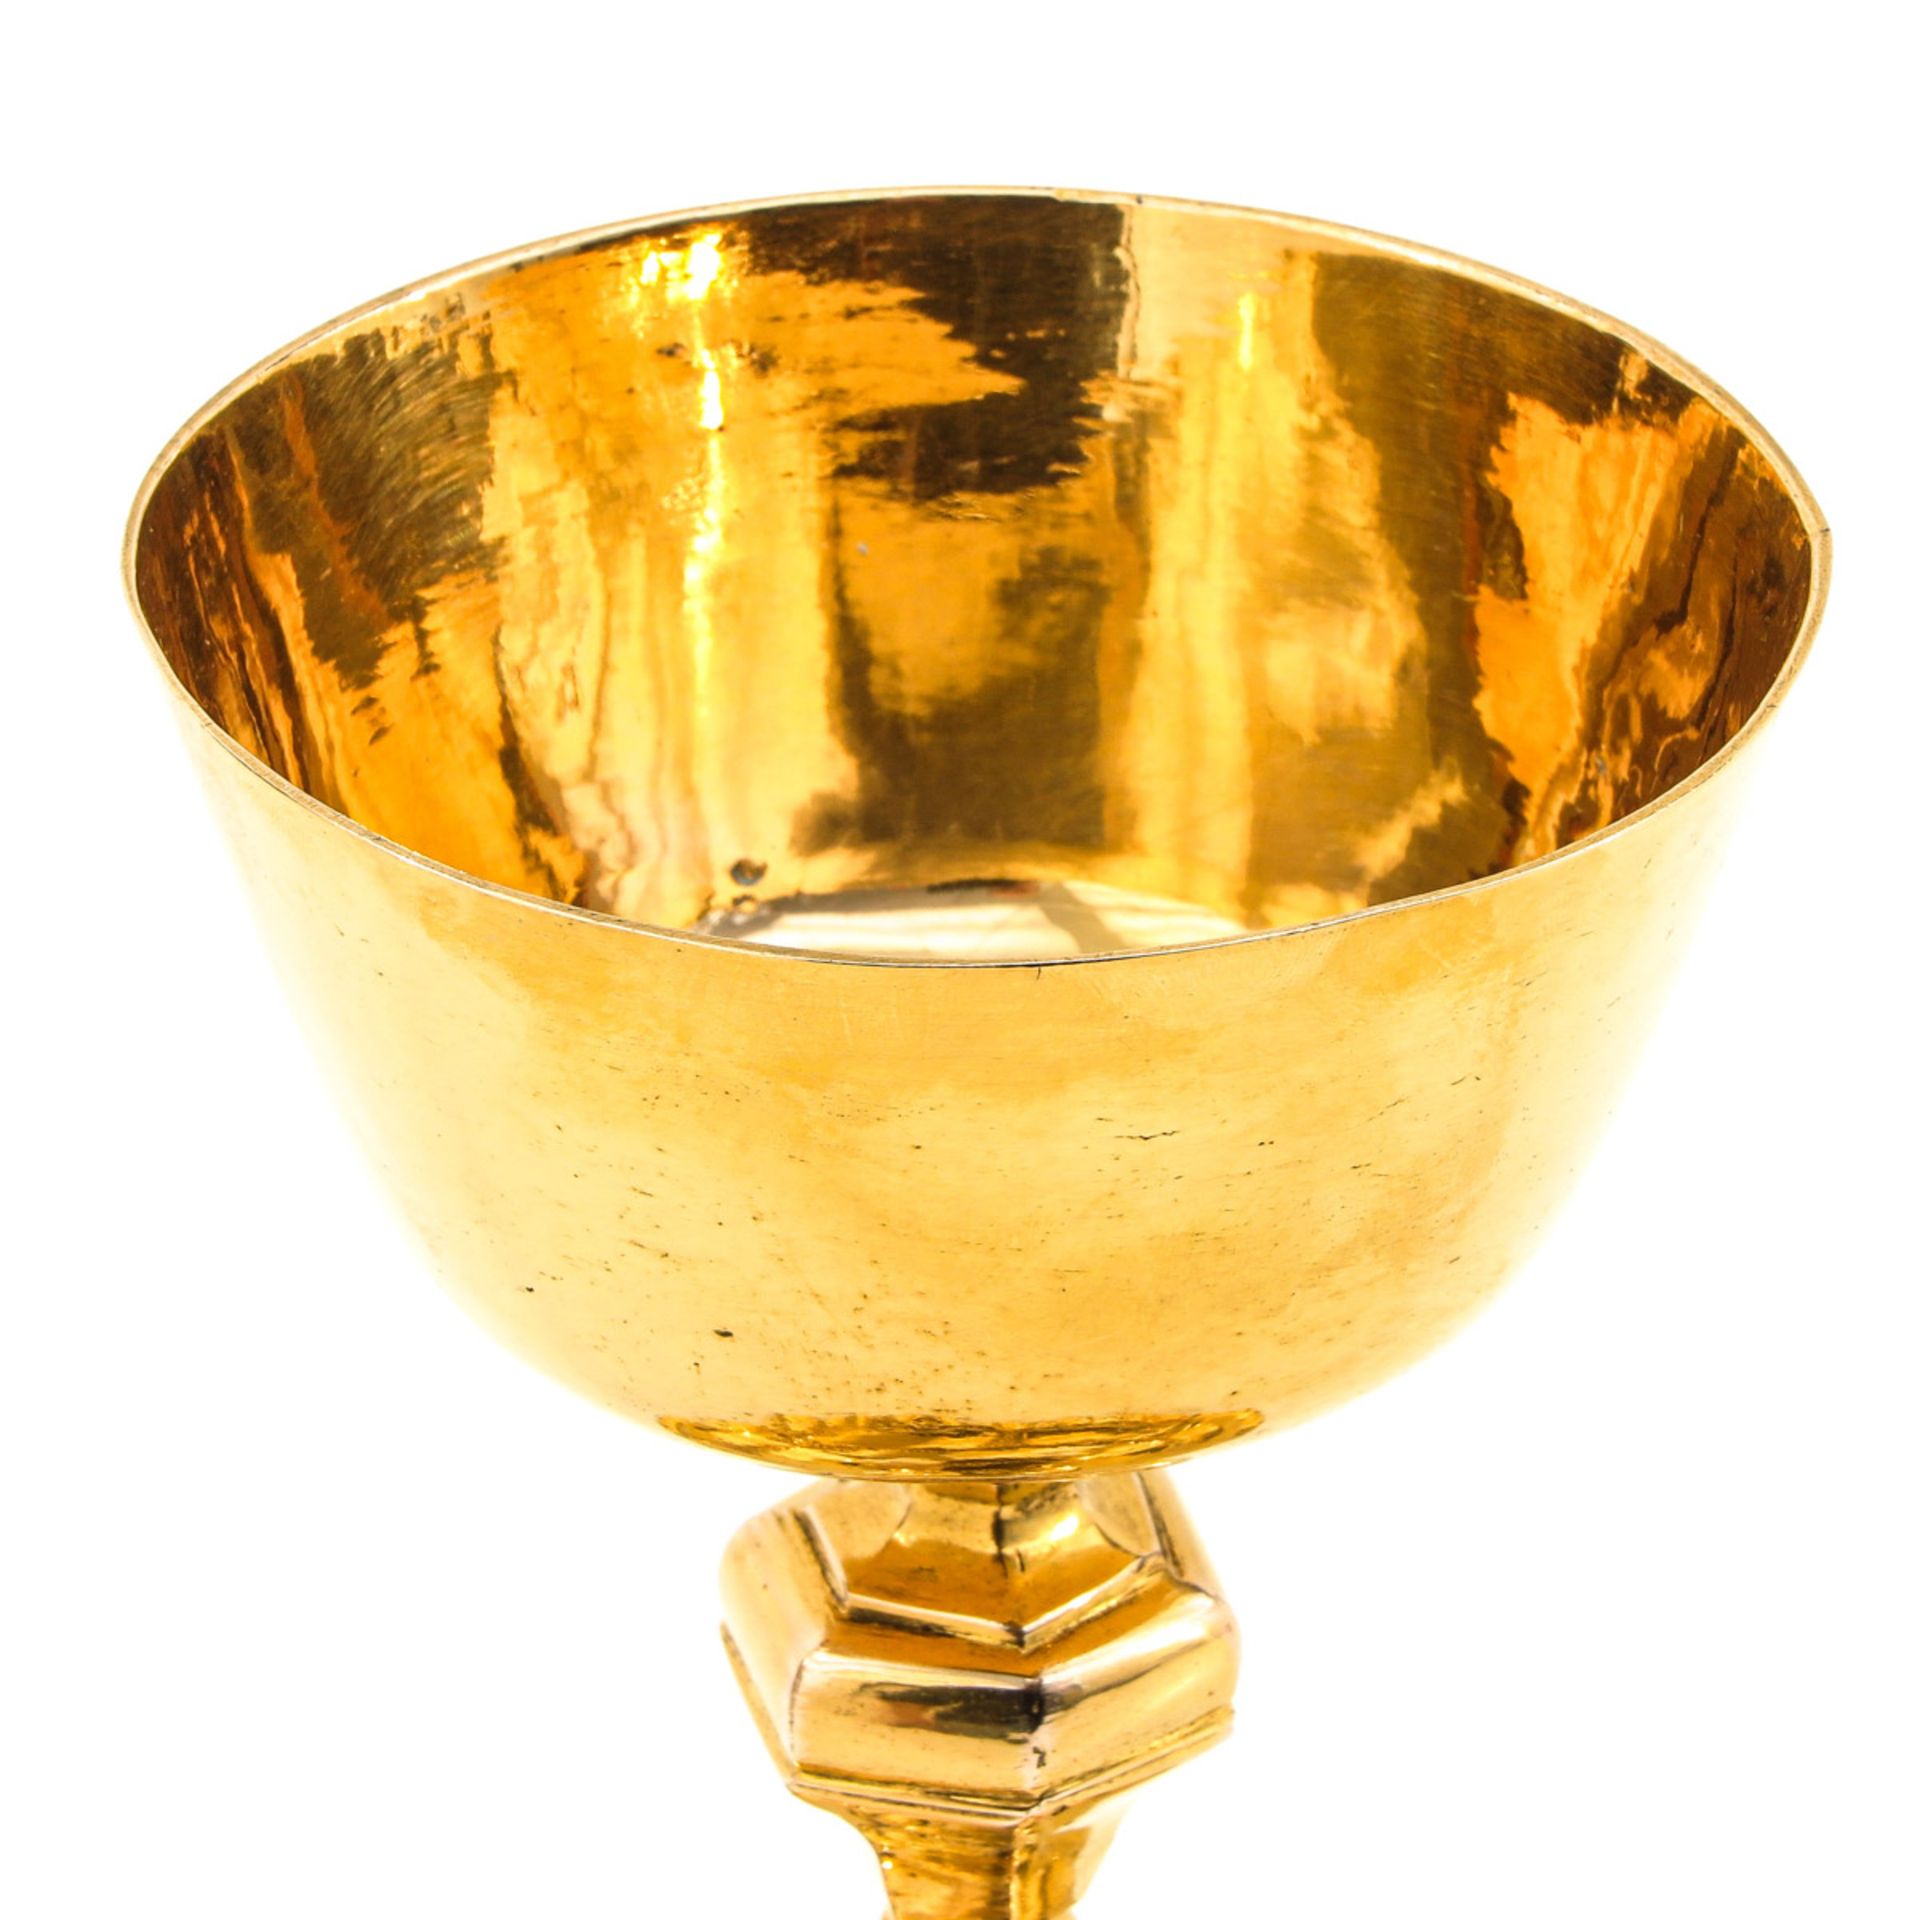 A Chalice - Image 7 of 9